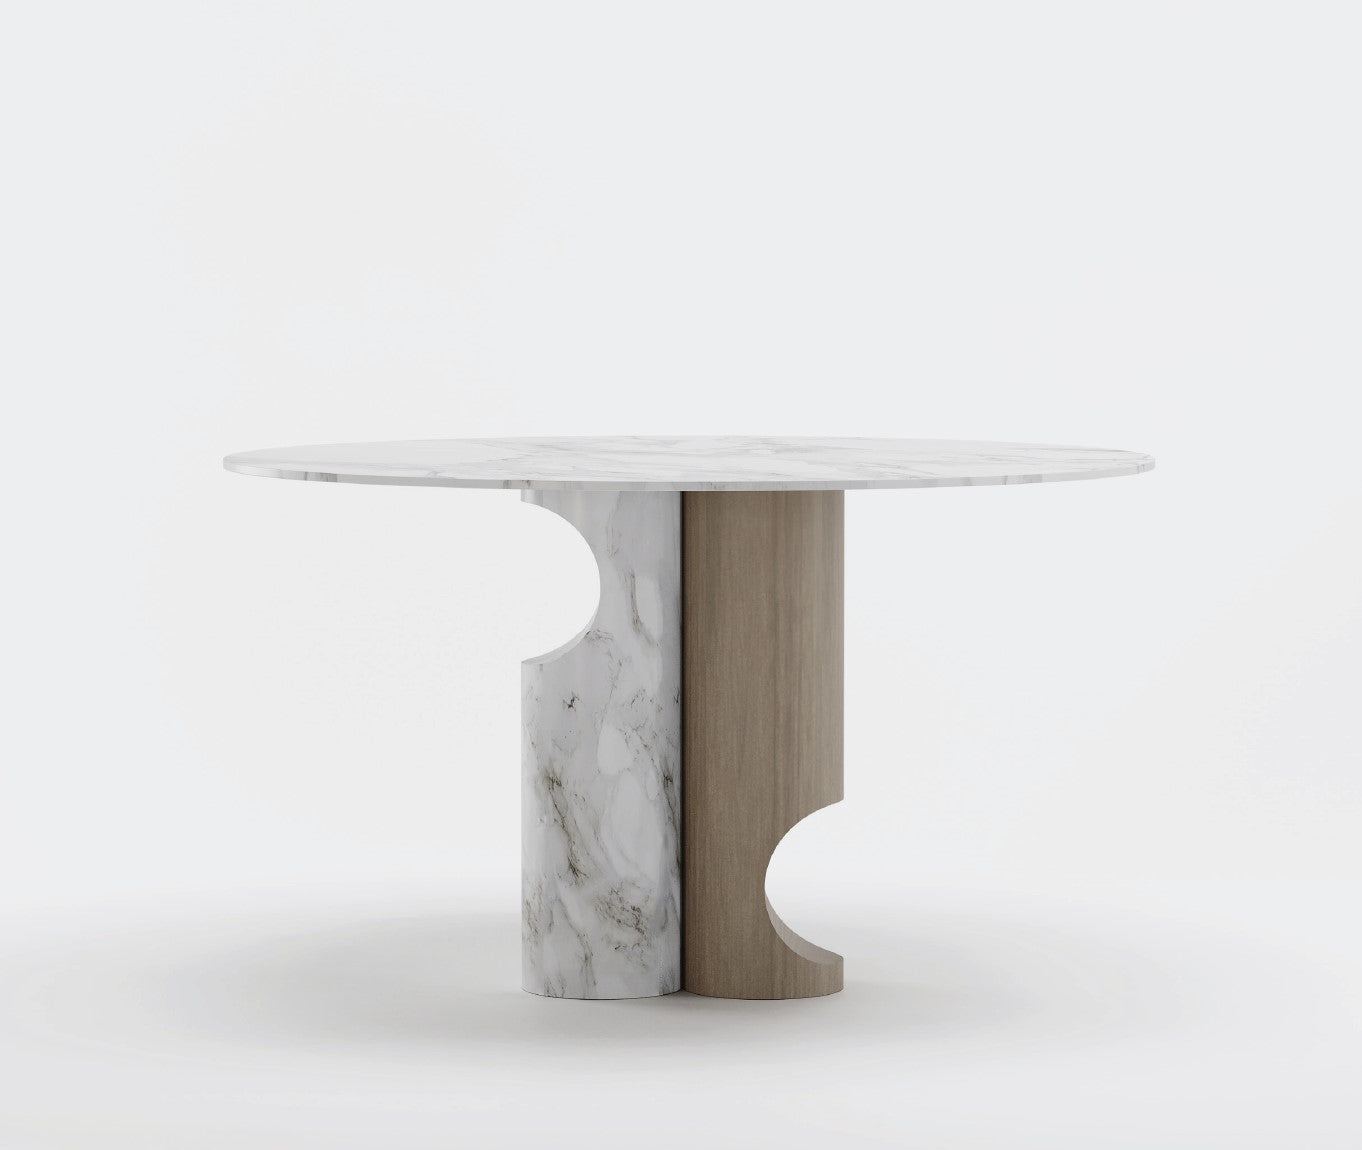 DUO FLUCTO I Dining table by Emanuele Santalena